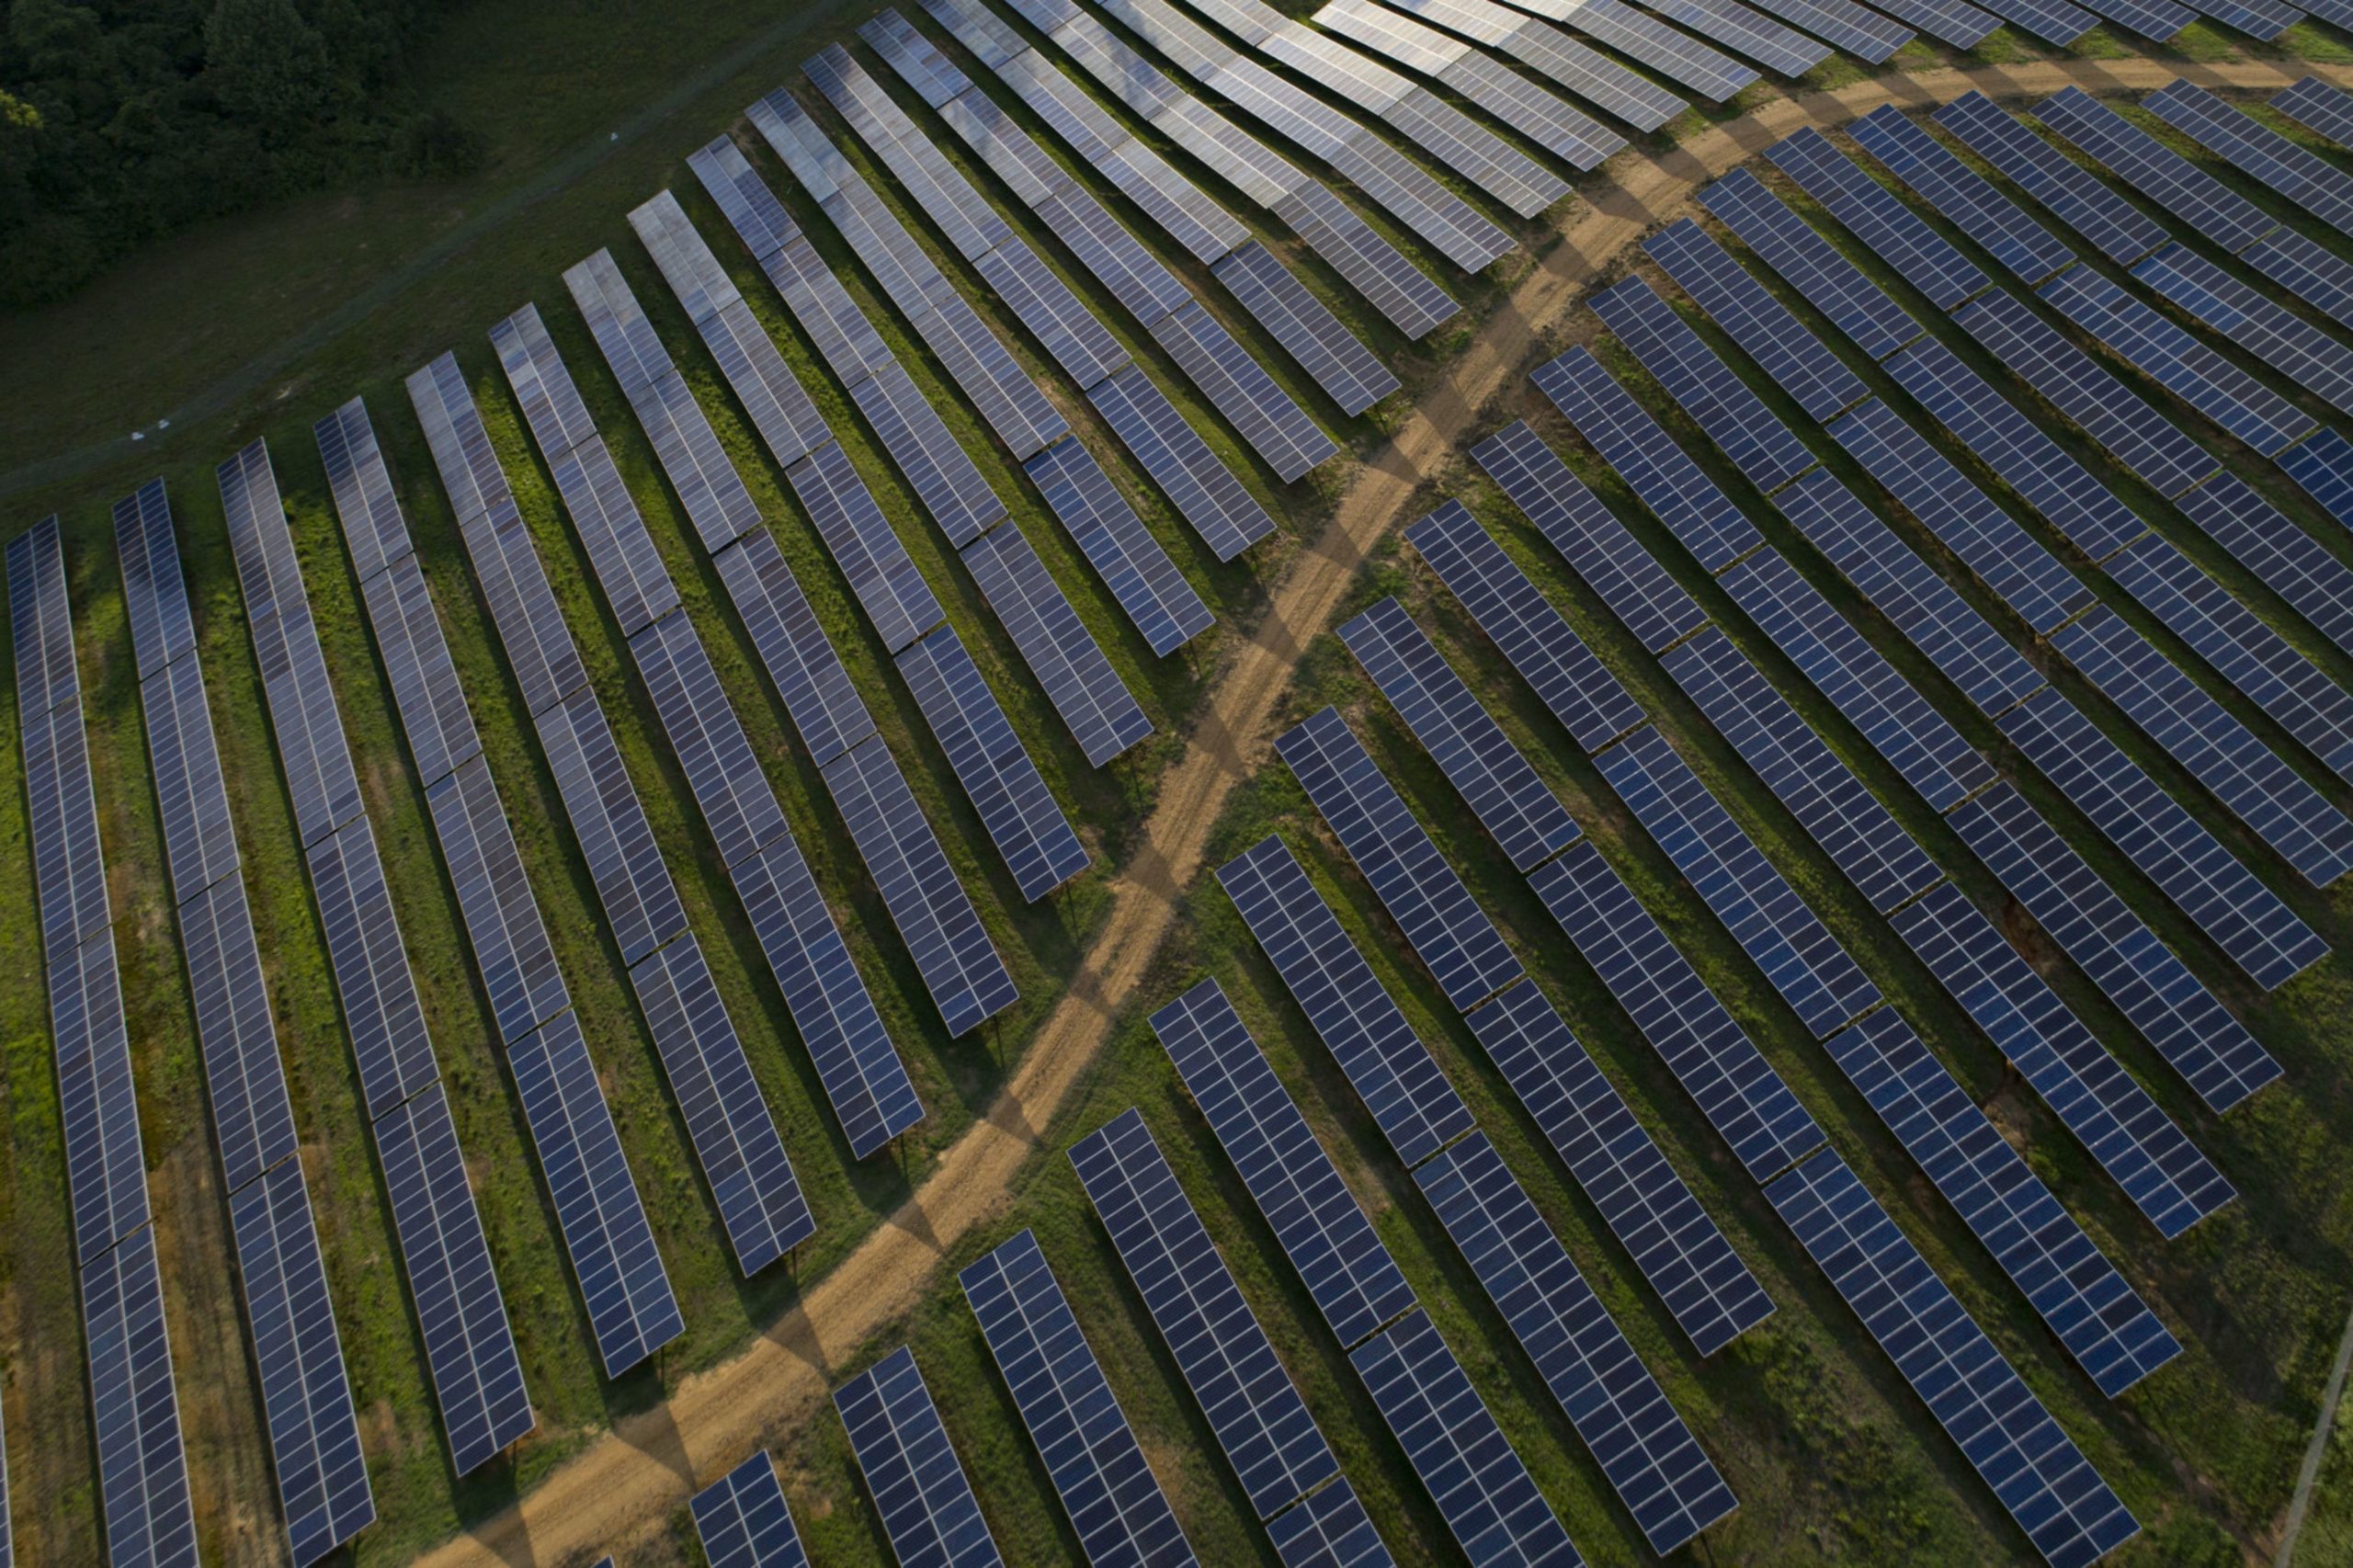 Solar panels stand at the Dominion Energy Inc. Selmer solar generating facility in this aerial photograph taken above Selmer, Tennessee, U.S., on Wednesday, May 23, 2018. Large oil companies in Europe are continuing to diversify their holdings and increase clean-energy investments. Royal Dutch Shell Plc agreed in January to buy a 44 percent stake in Silicon Ranch Corp., the Nashville-based owner and operator of U.S. solar plants. Photographer: Daniel Acker/Bloomberg 